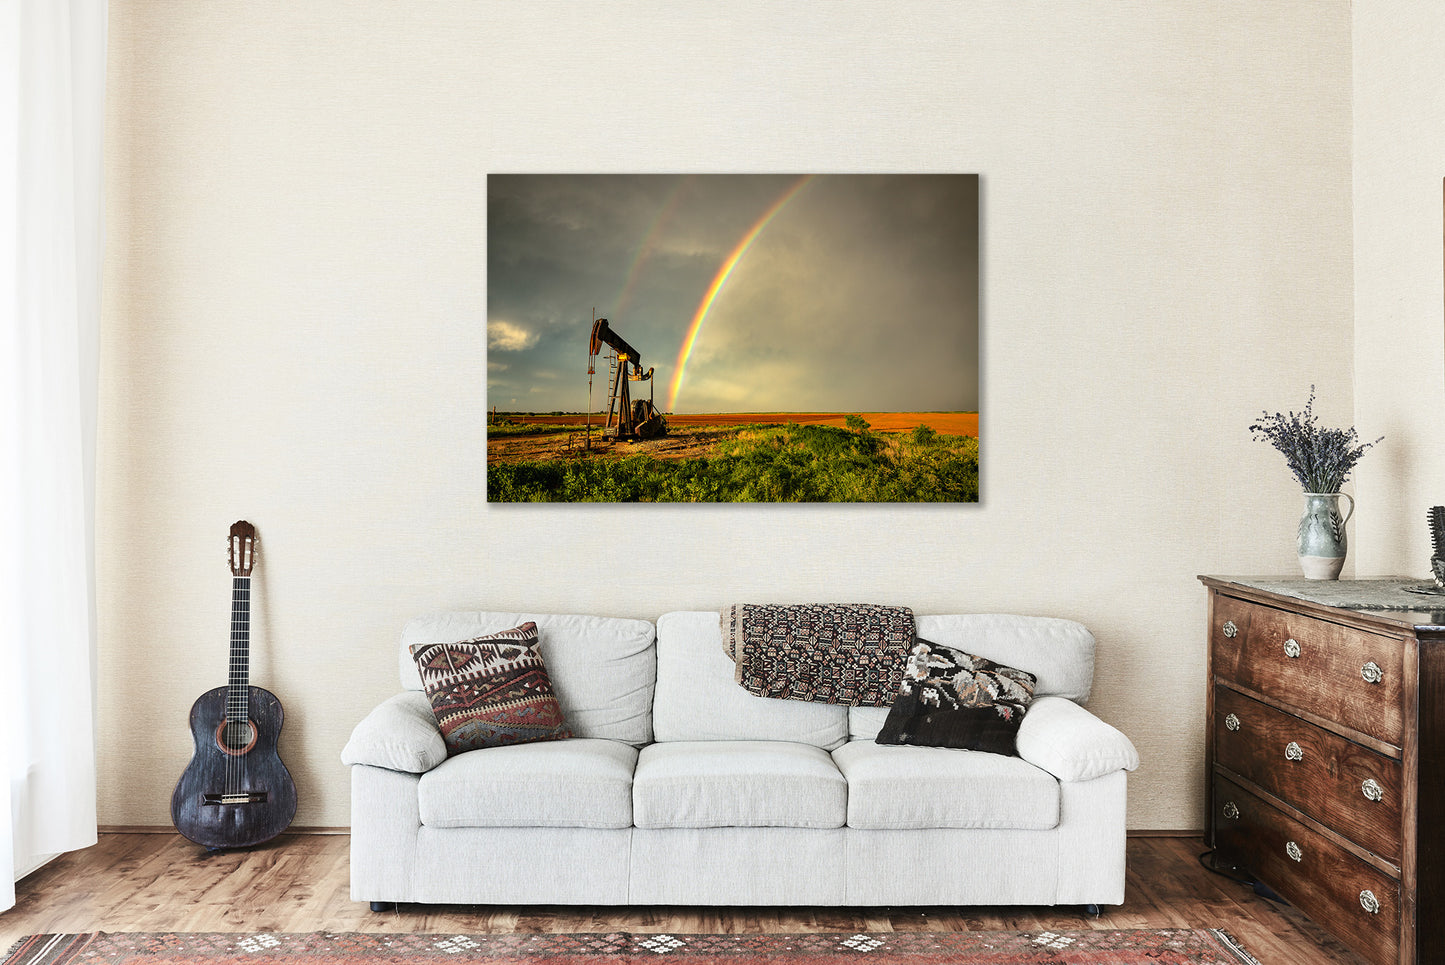 Oilfield Metal Print - Rainbow Ending at Pump Jack After Stormy Spring Day in Texas - Ready to Hang Oil and Gas Wall Art Photo Decor